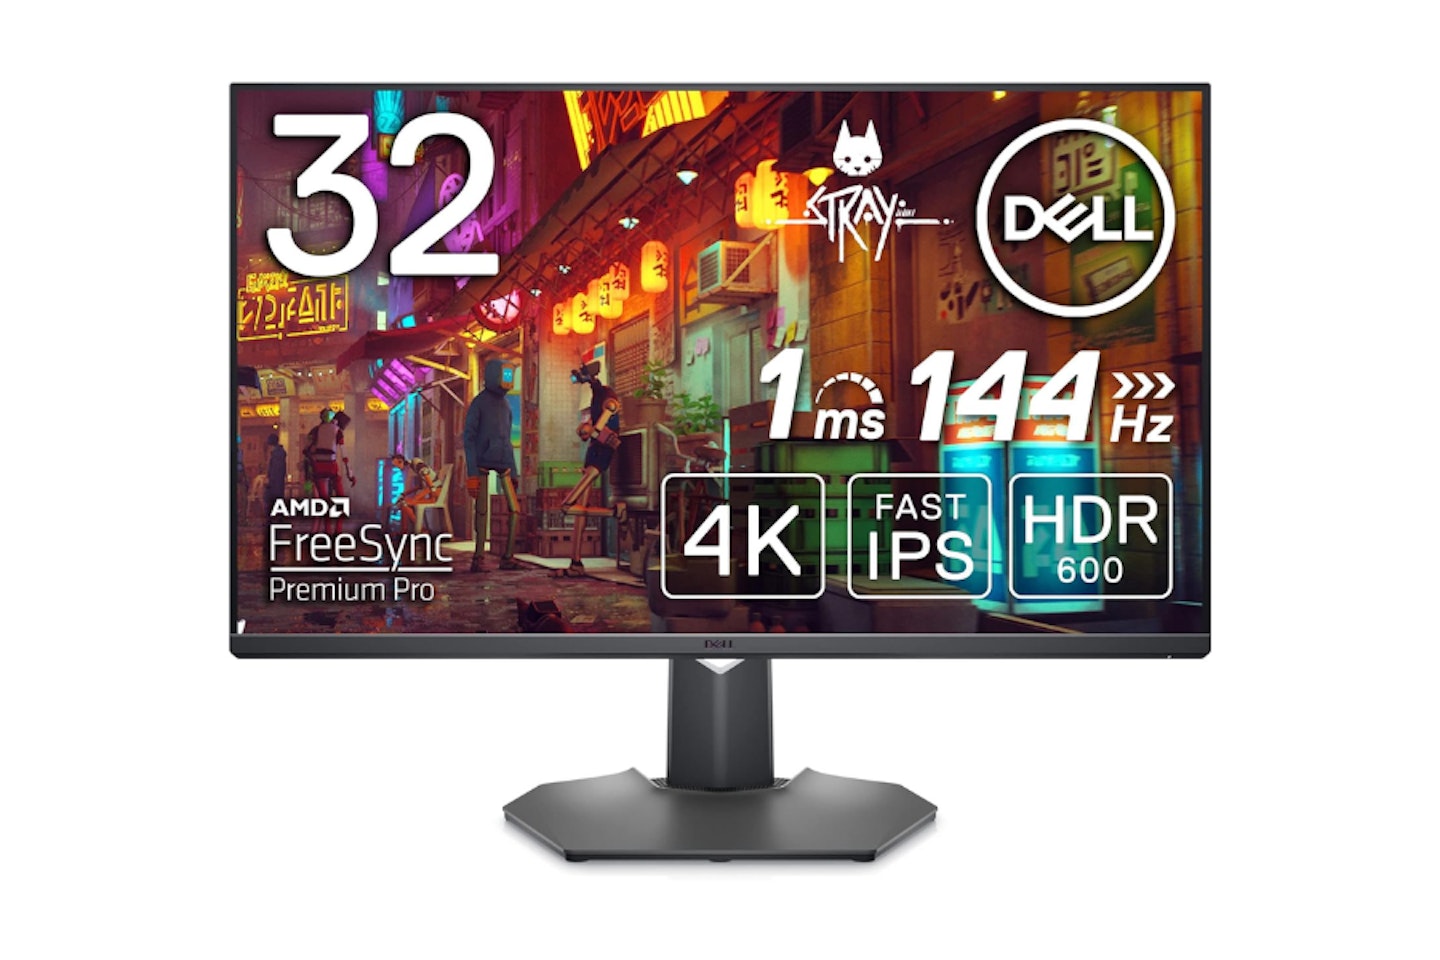 Dell G3223Q 32 Inch 4K UHD Monitor - one of the Best monitors for dual screens